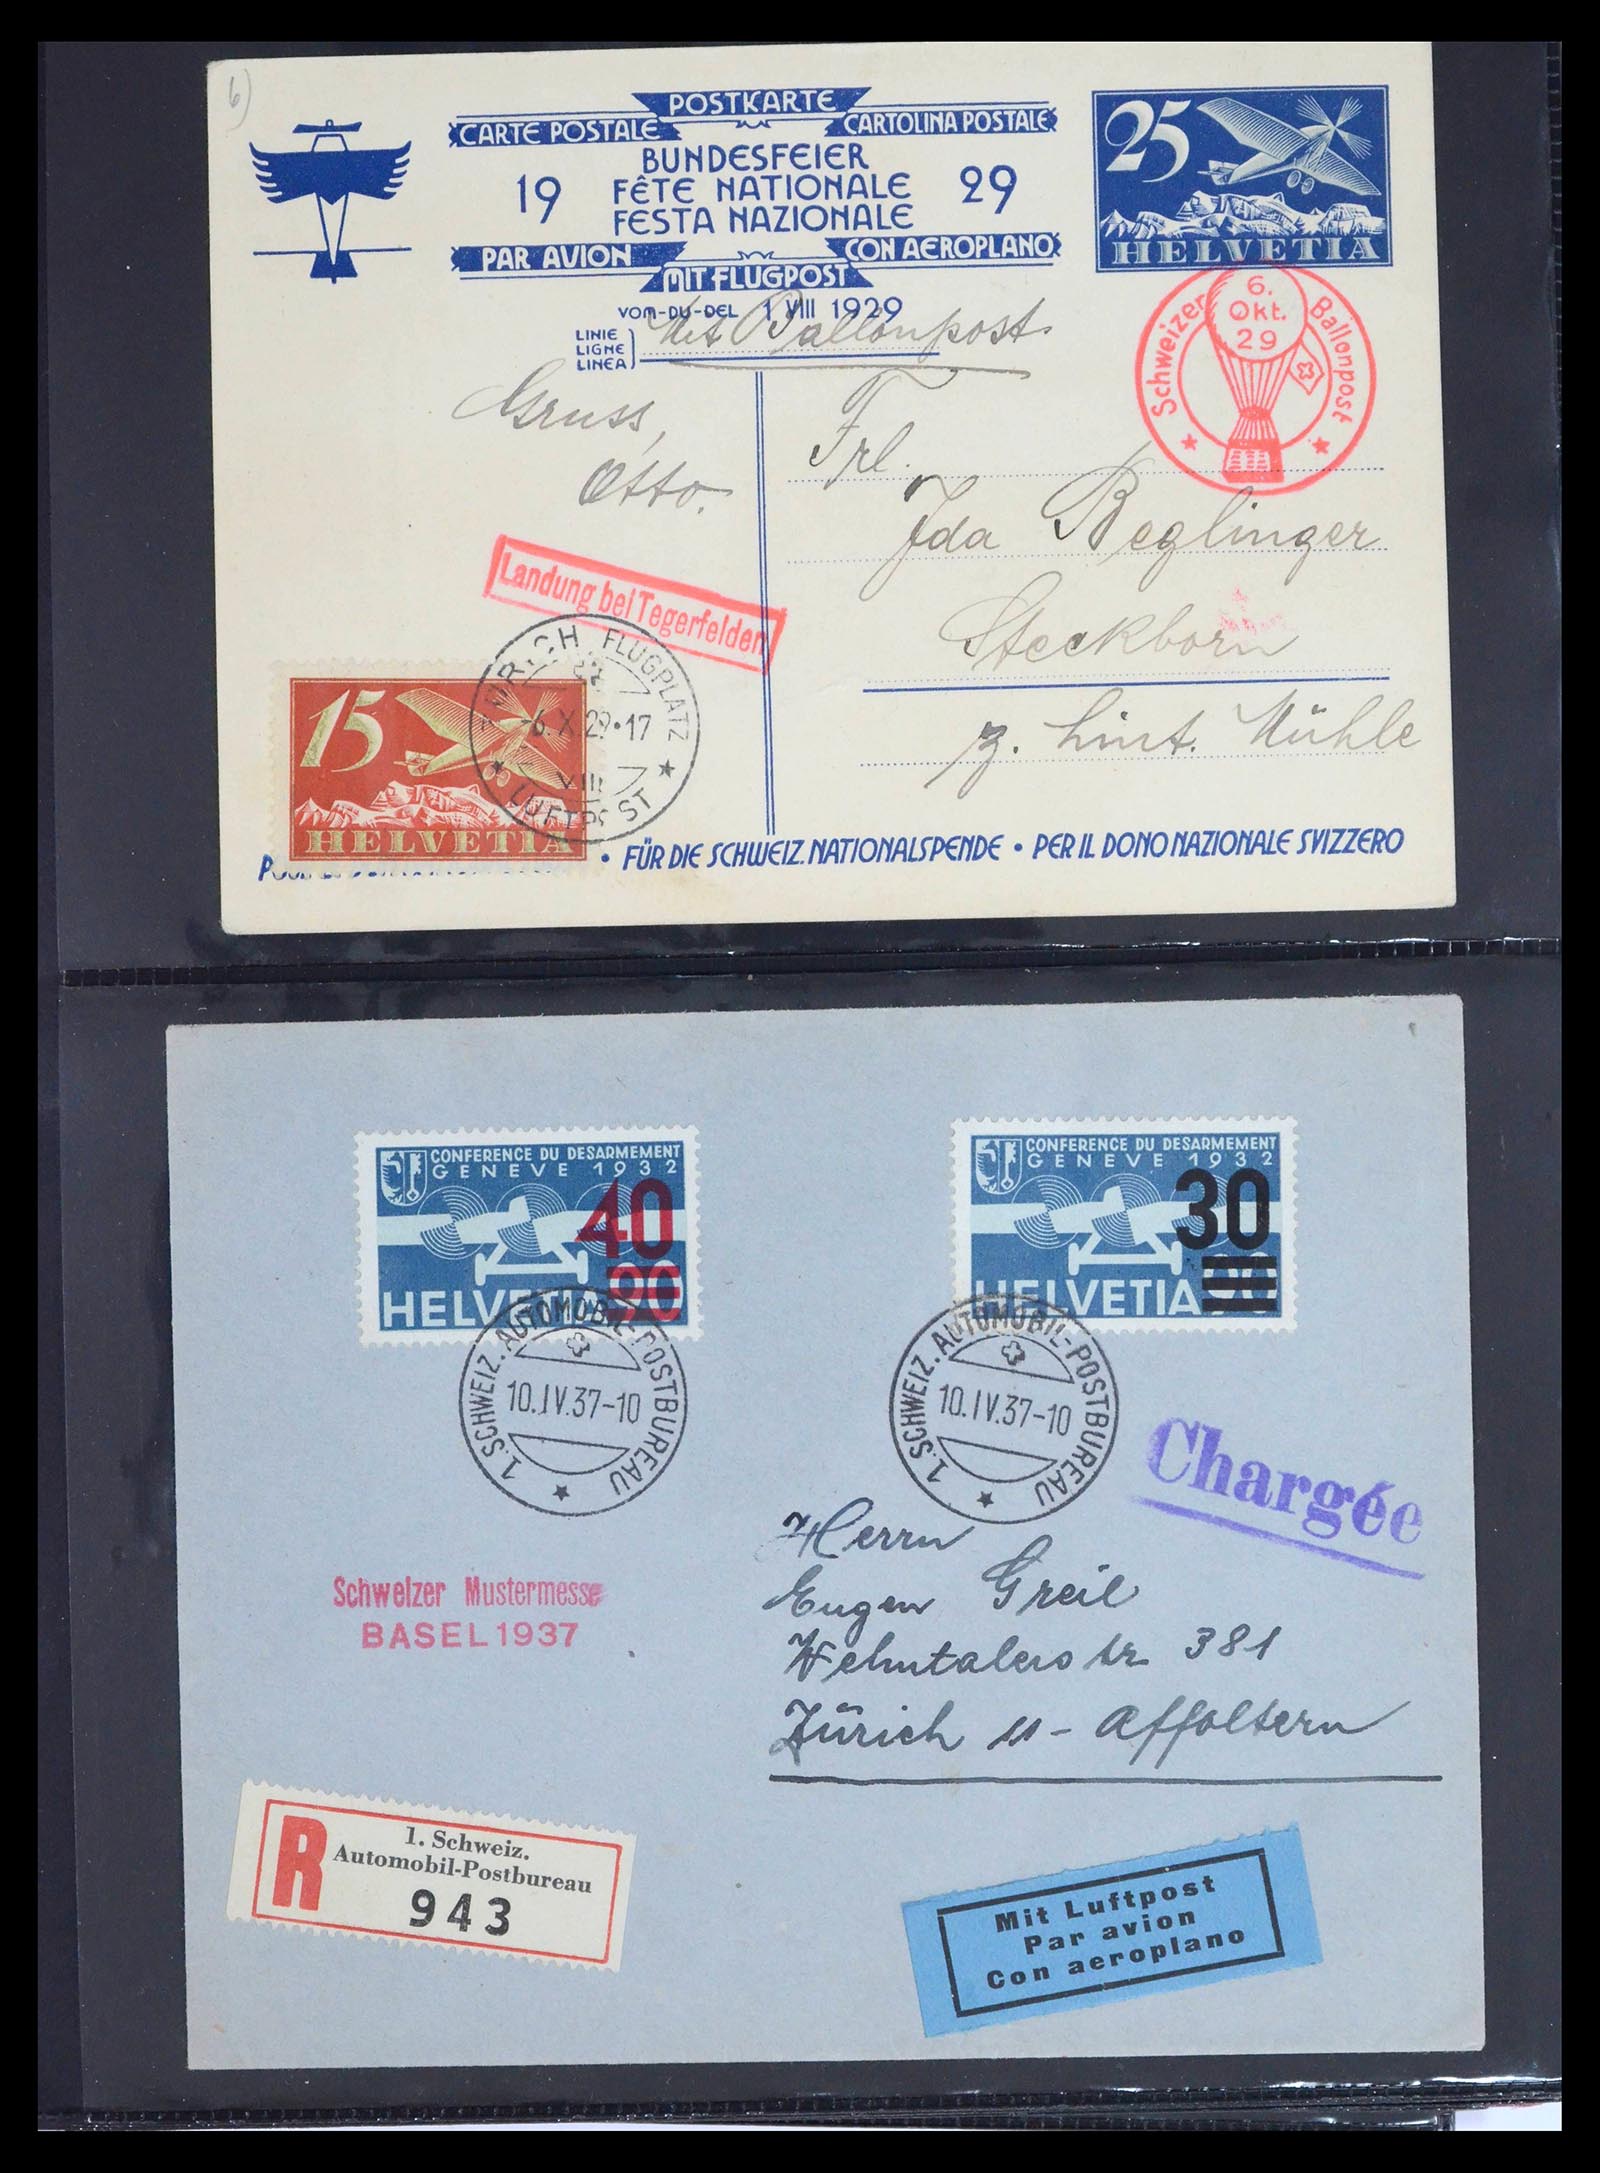 39533 0005 - Stamp collection 39533 Zwitserland airmail covers 1925-1960.